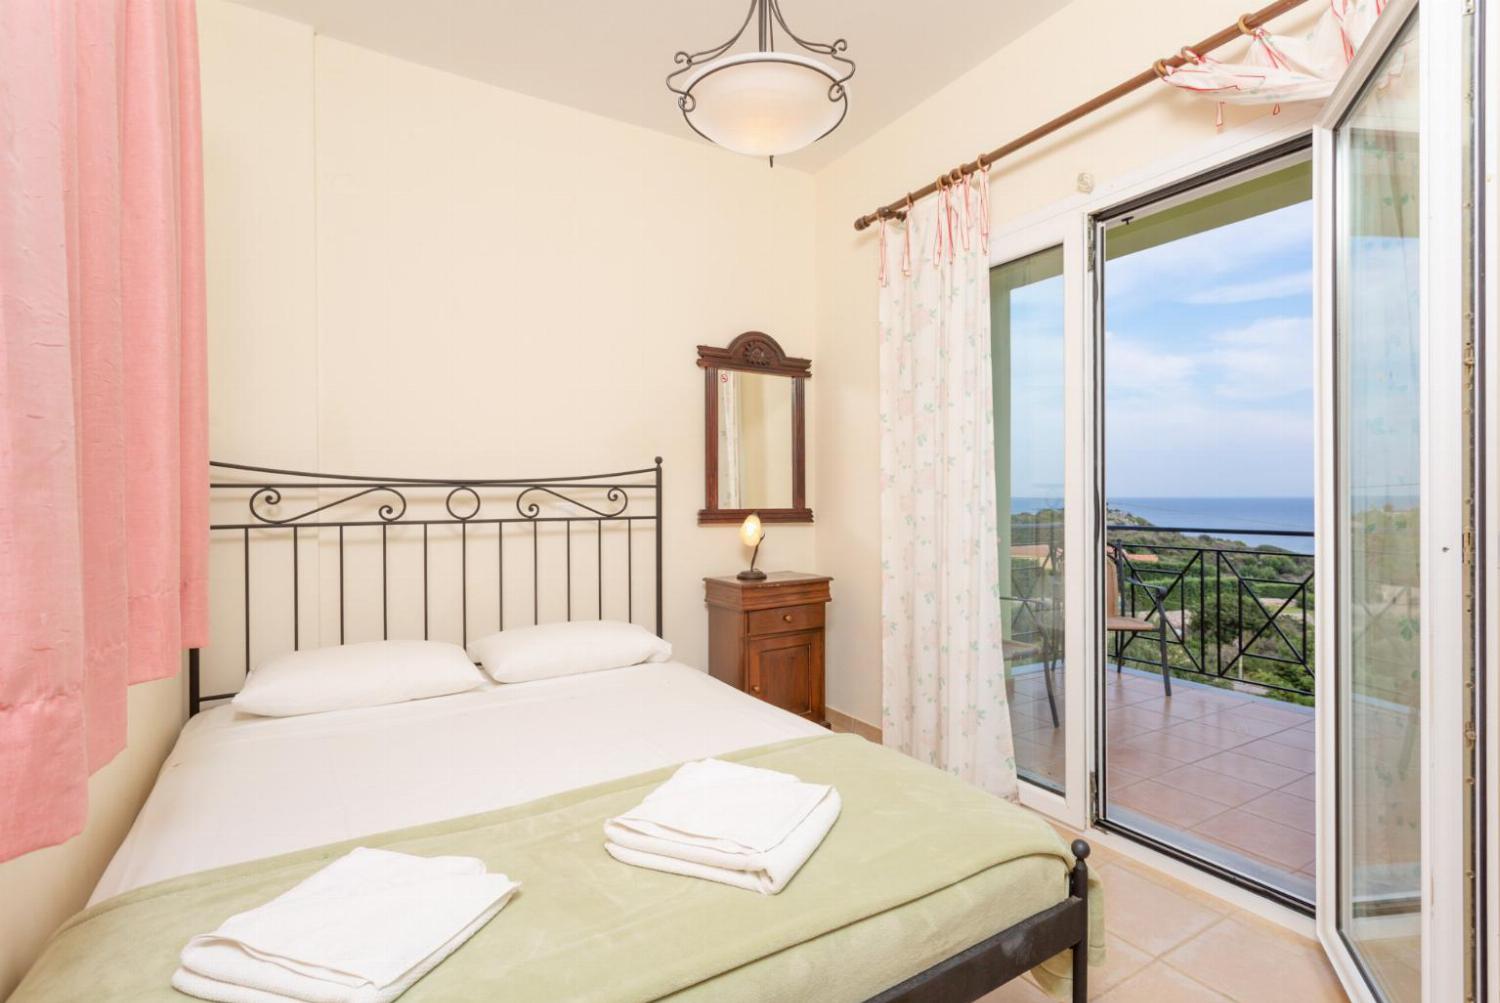 Double bedroom with A/C, and balcony access with sea views